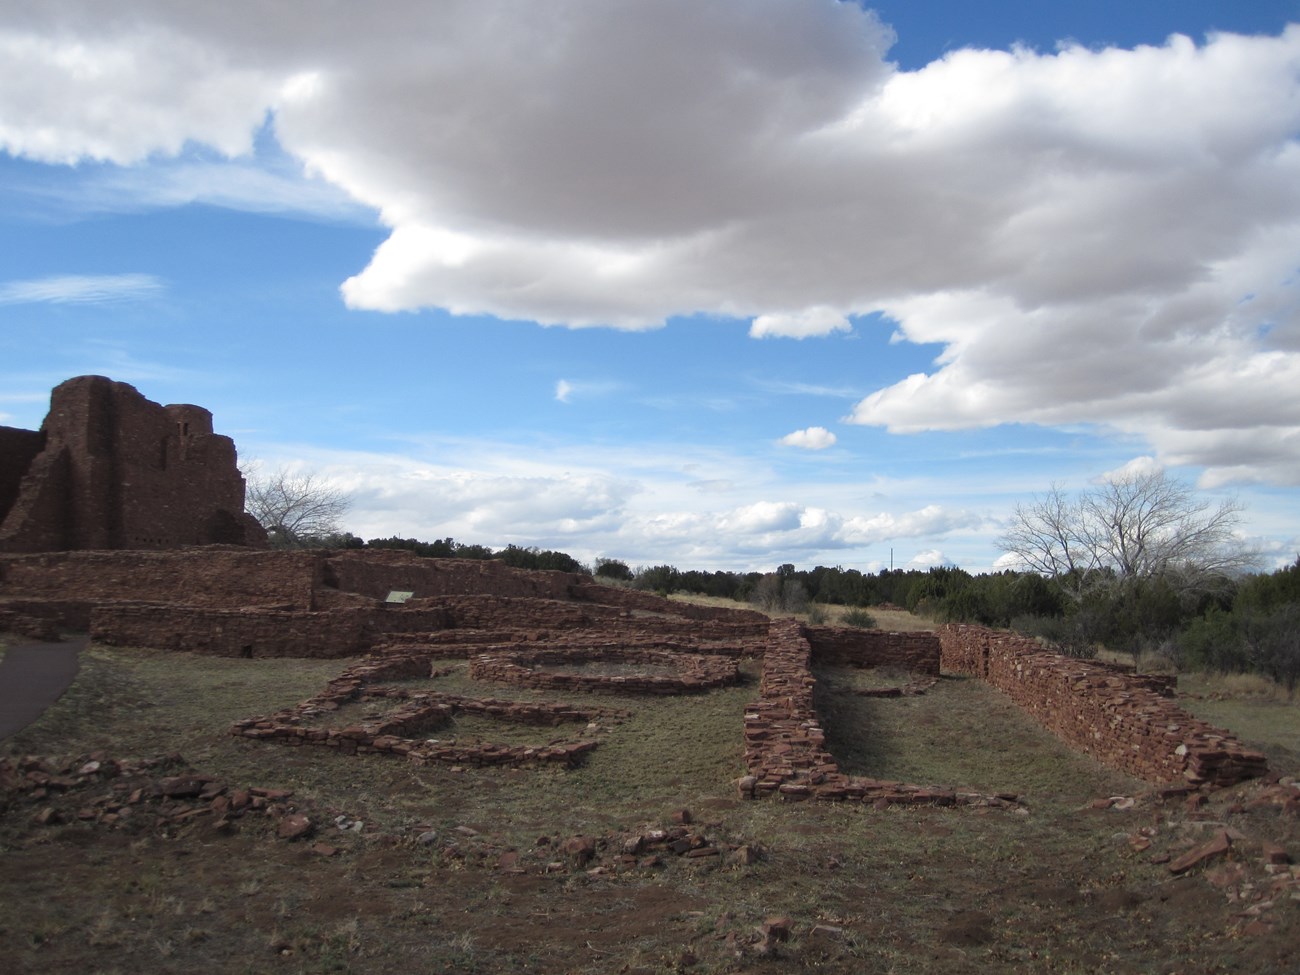 The remains of the Lucero structures near the Quarai Mission